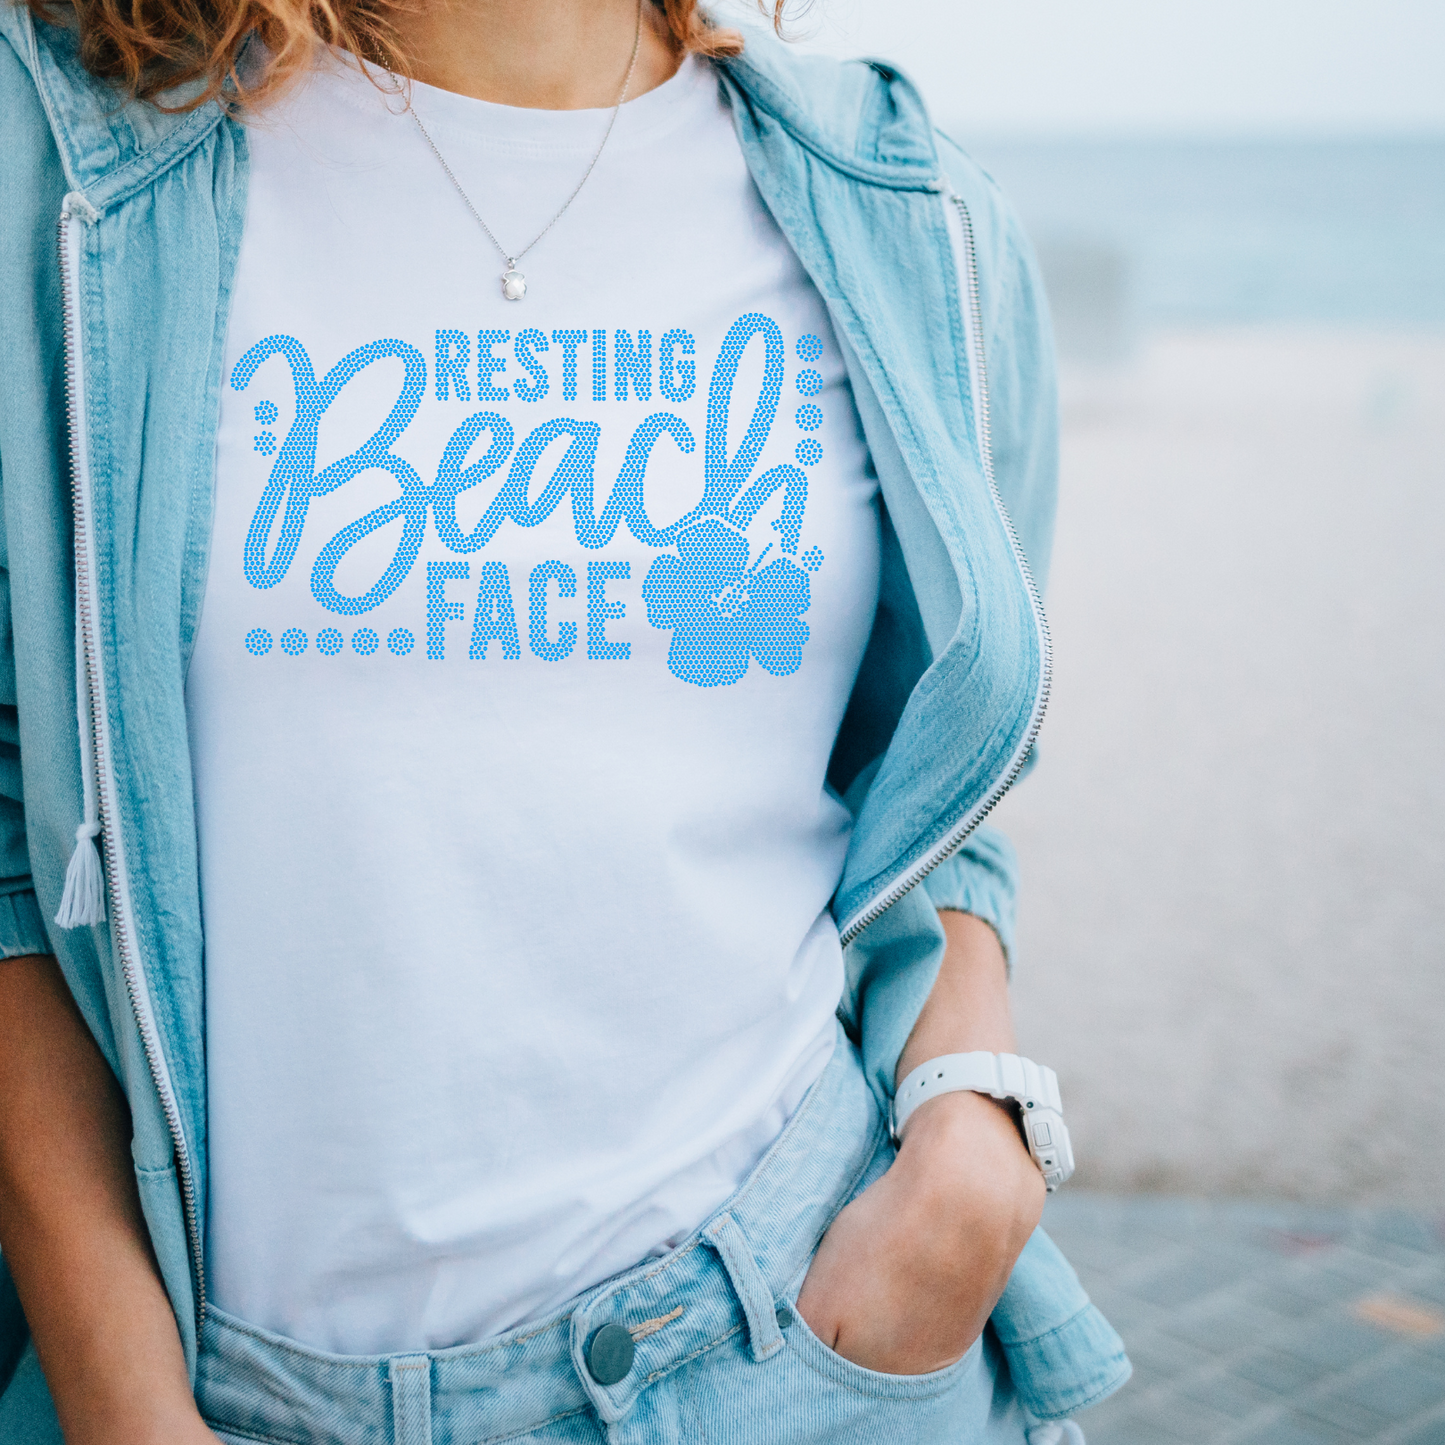 SPANGLES- Resting Beach Face - One Color - 5-7 business day turnaround time